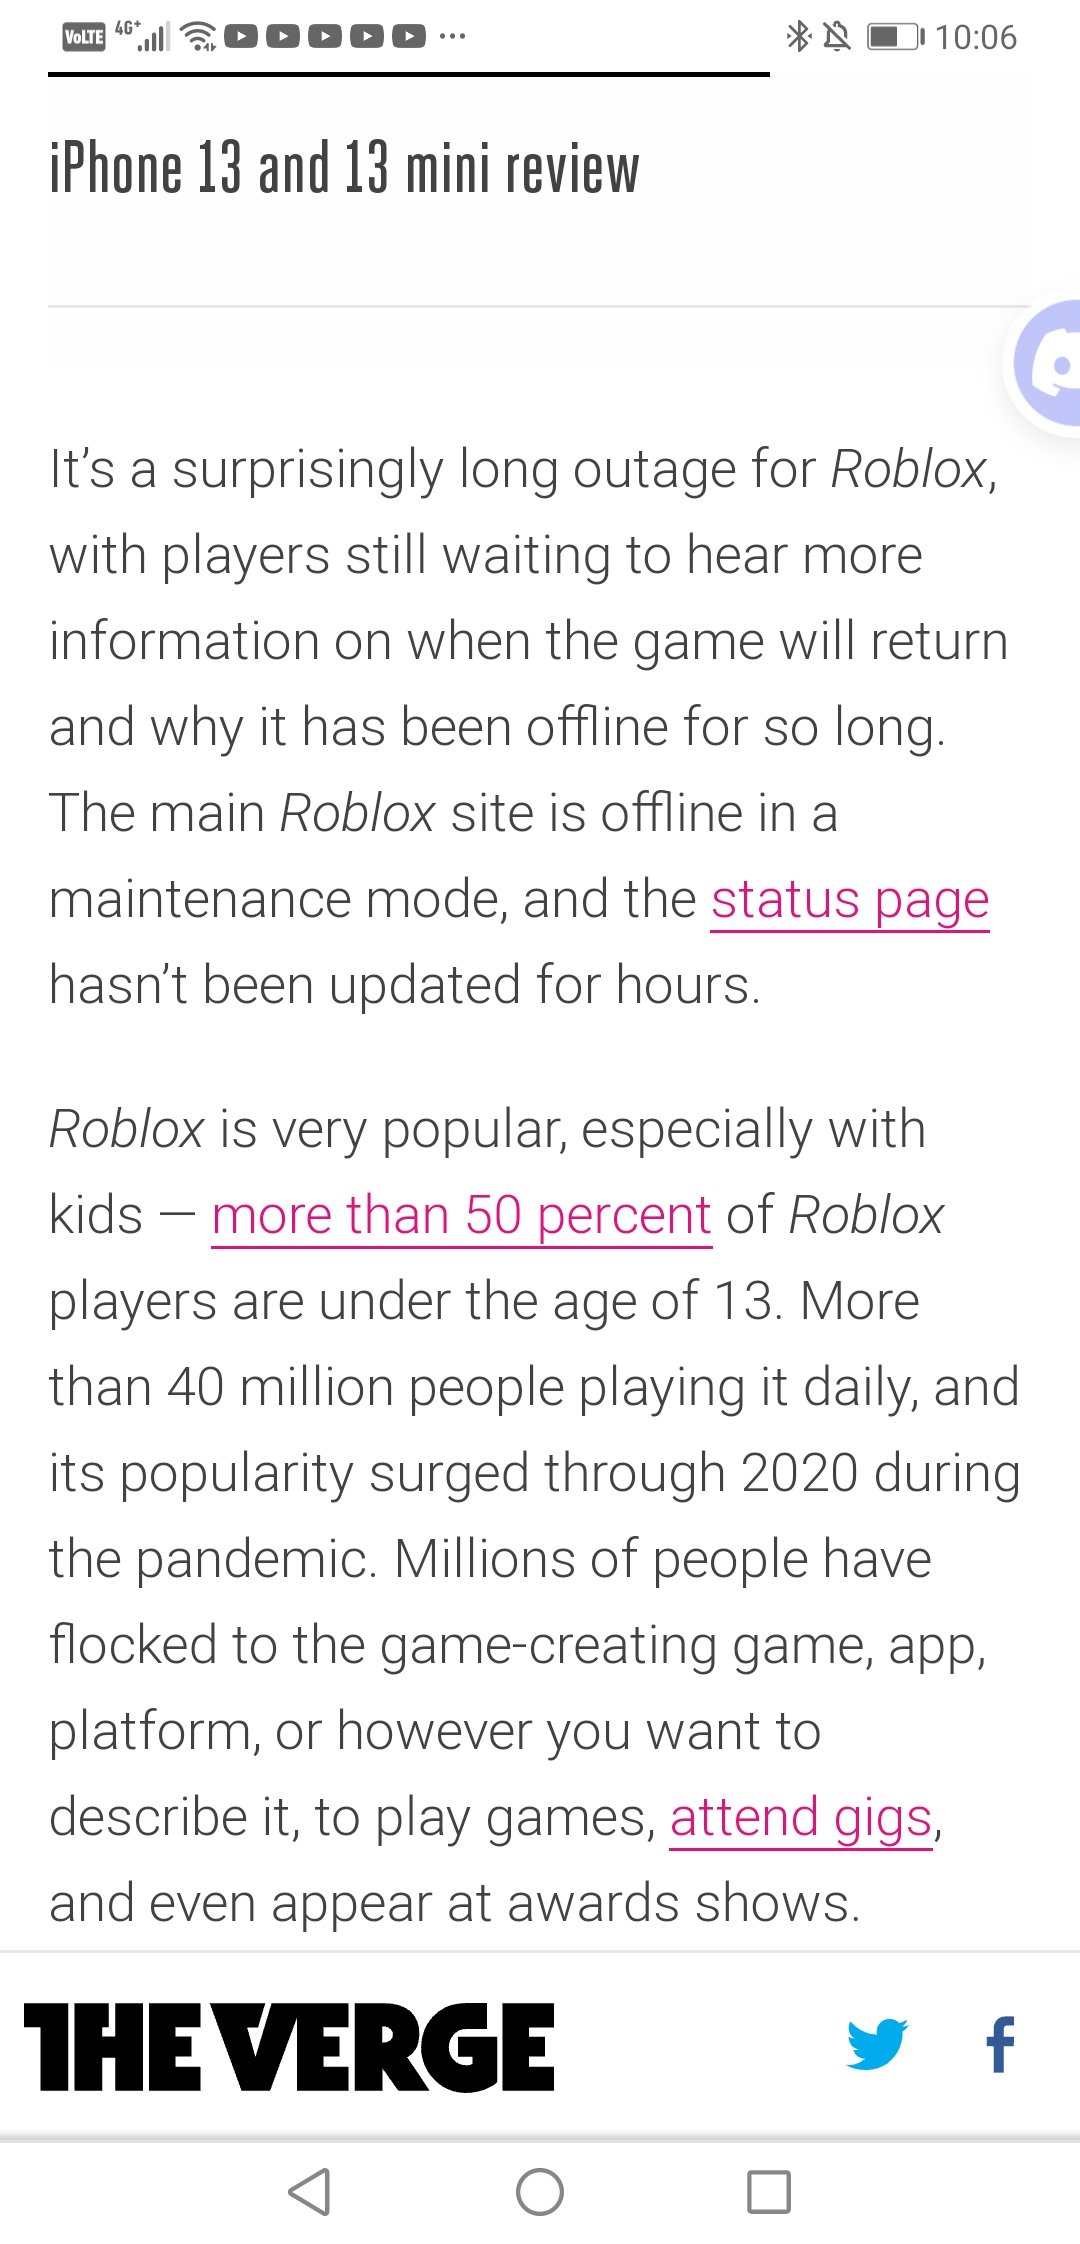 I am providing updates regarding the Roblox outage on my Twitter: twitter.com/Bloxy_News.  Follow me there to receive the latest updates!